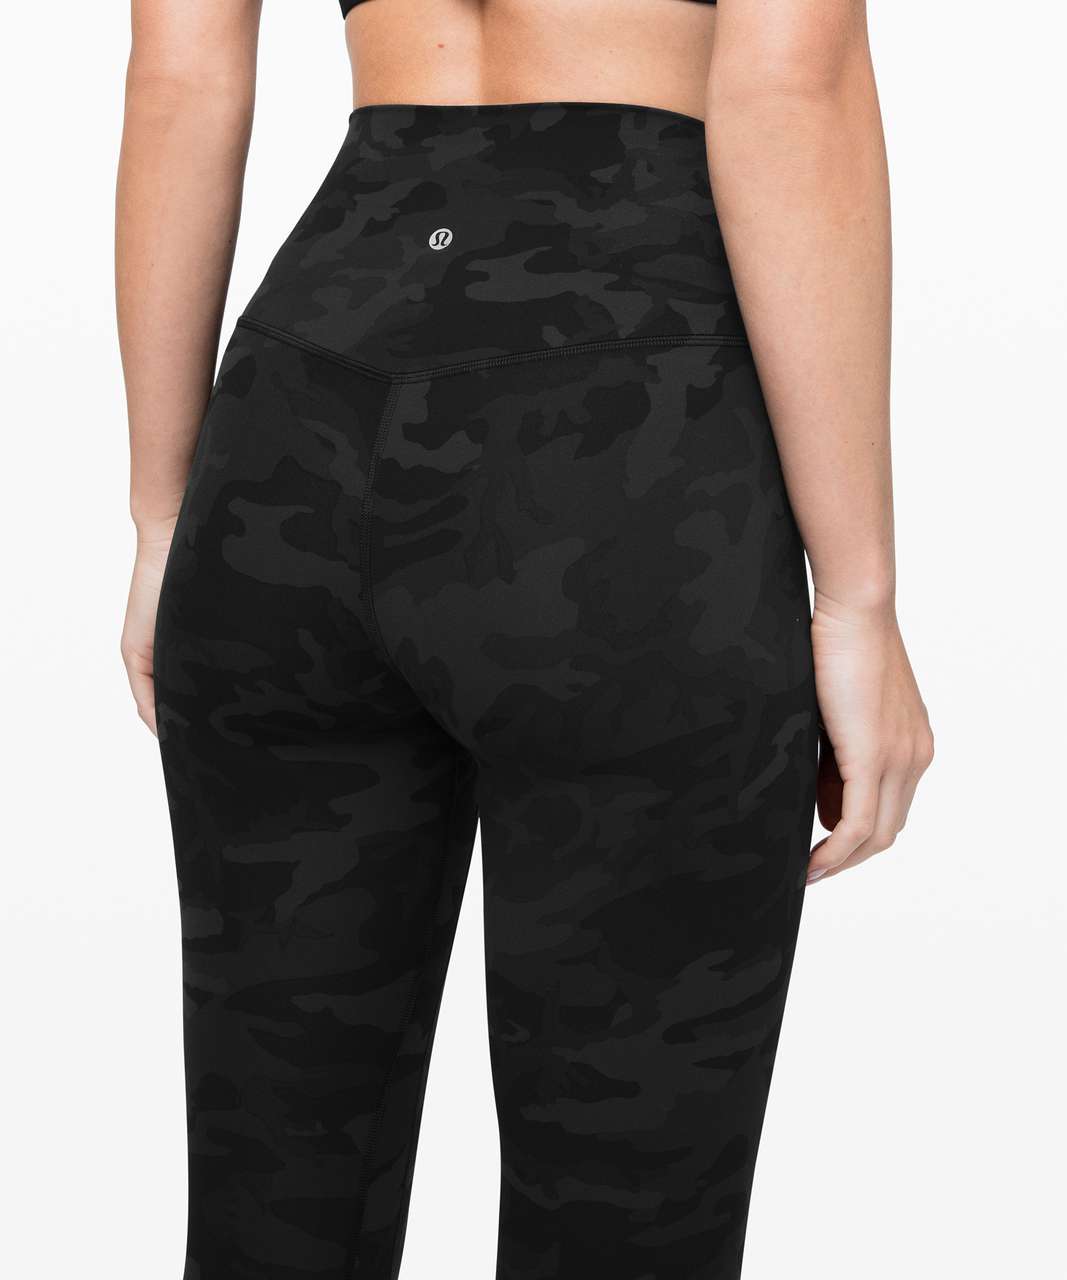 Incognito camo grey SHR alignsthe fabric seems thinner than the solid  colors I have. Is this a known issue? : r/lululemon